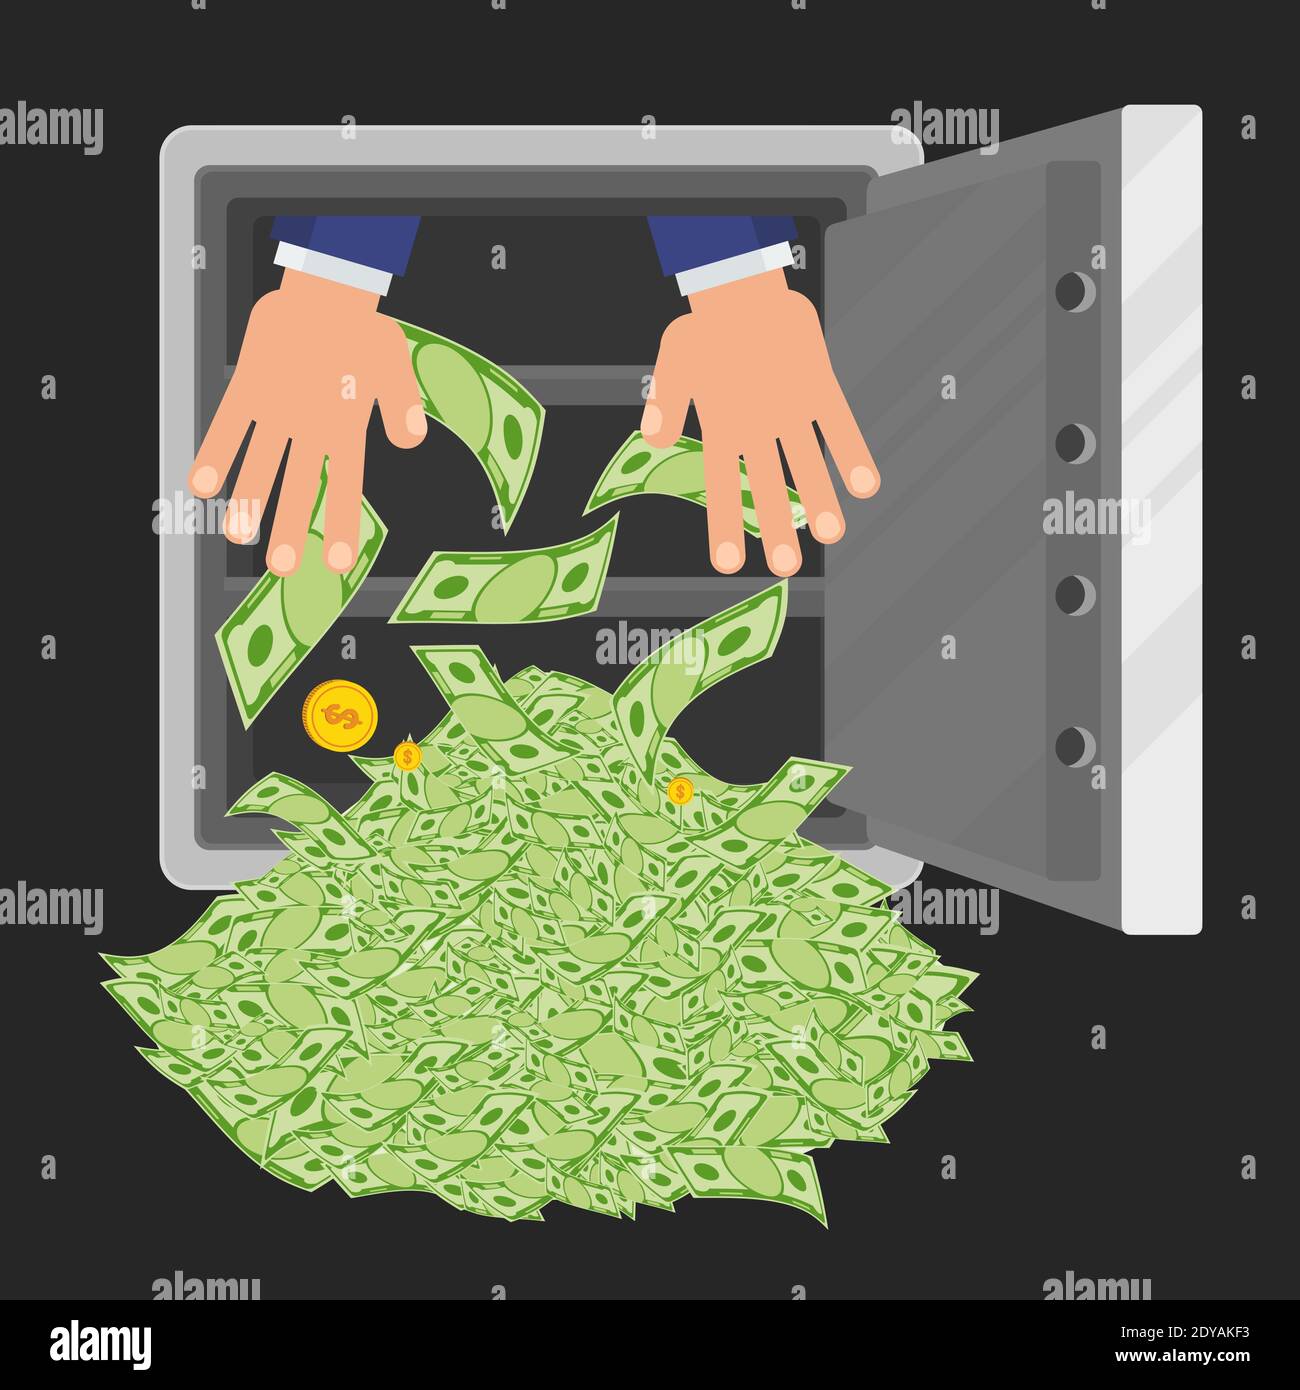 Waste of money concept. Dollar bills flying out of hands. Stock Vector